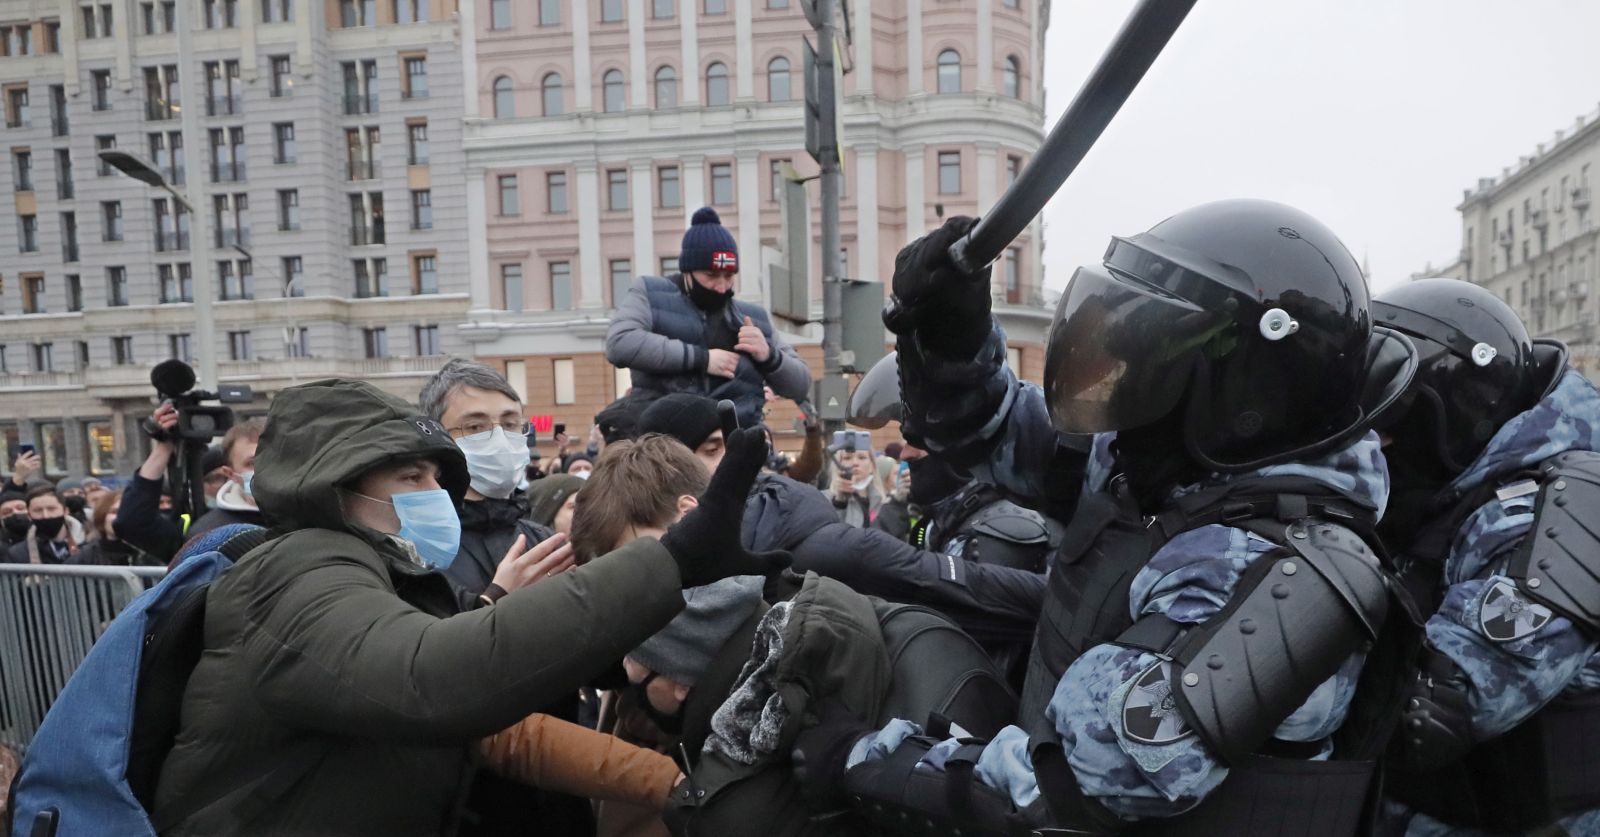 epa08960712 Russian special police units officers clash with protesters during an unauthorized protest in support of Russian opposition leader and blogger Alexei Navalny, in Moscow, Russia, 23 January 2021. Navalny was detained after his arrival to Moscow from Germany on 17 January 2021. A Moscow judge on 18 January ruled that he will remain in custody for 30 days following his airport arrest. Navalny urged Russians to take to the streets to protest. In many Russian cities mass events are prohibited due to an increasing number of cases of the COVID-19 pandemic caused by the SARS CoV-2 coronavirus.  EPA/MAXIM SHIPENKOV